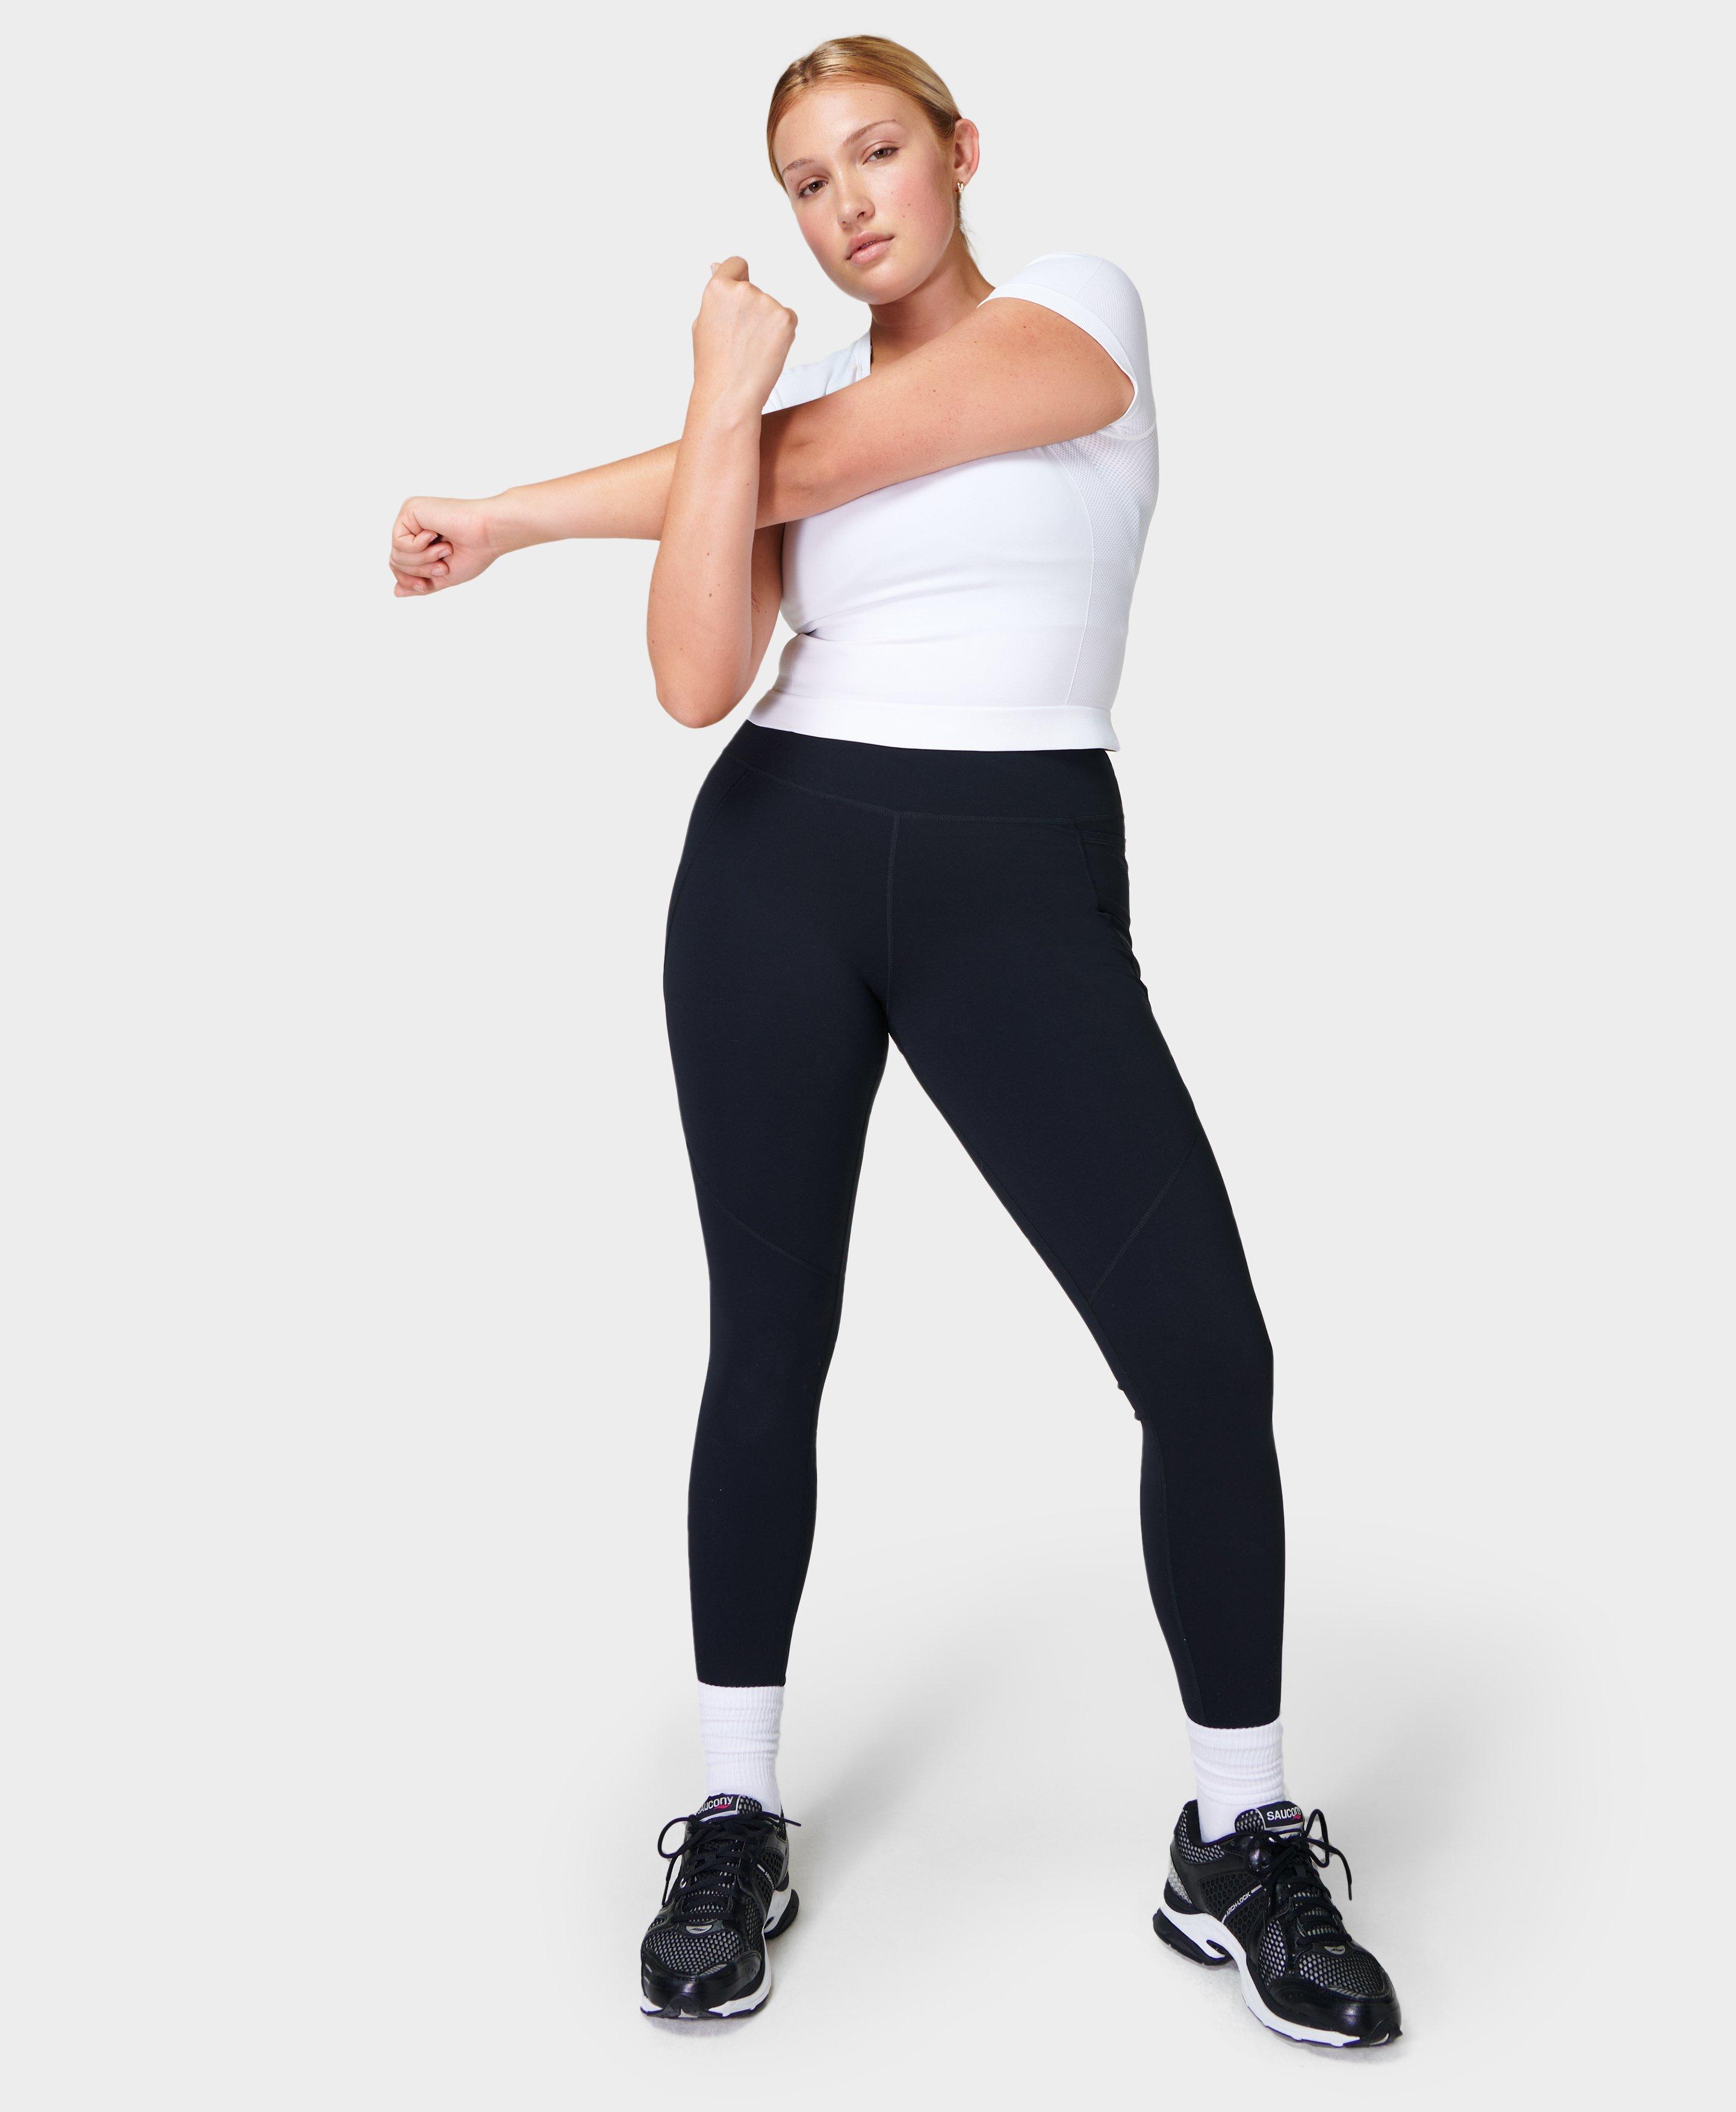 Siouxsie High Waisted Gym Leggings For Women